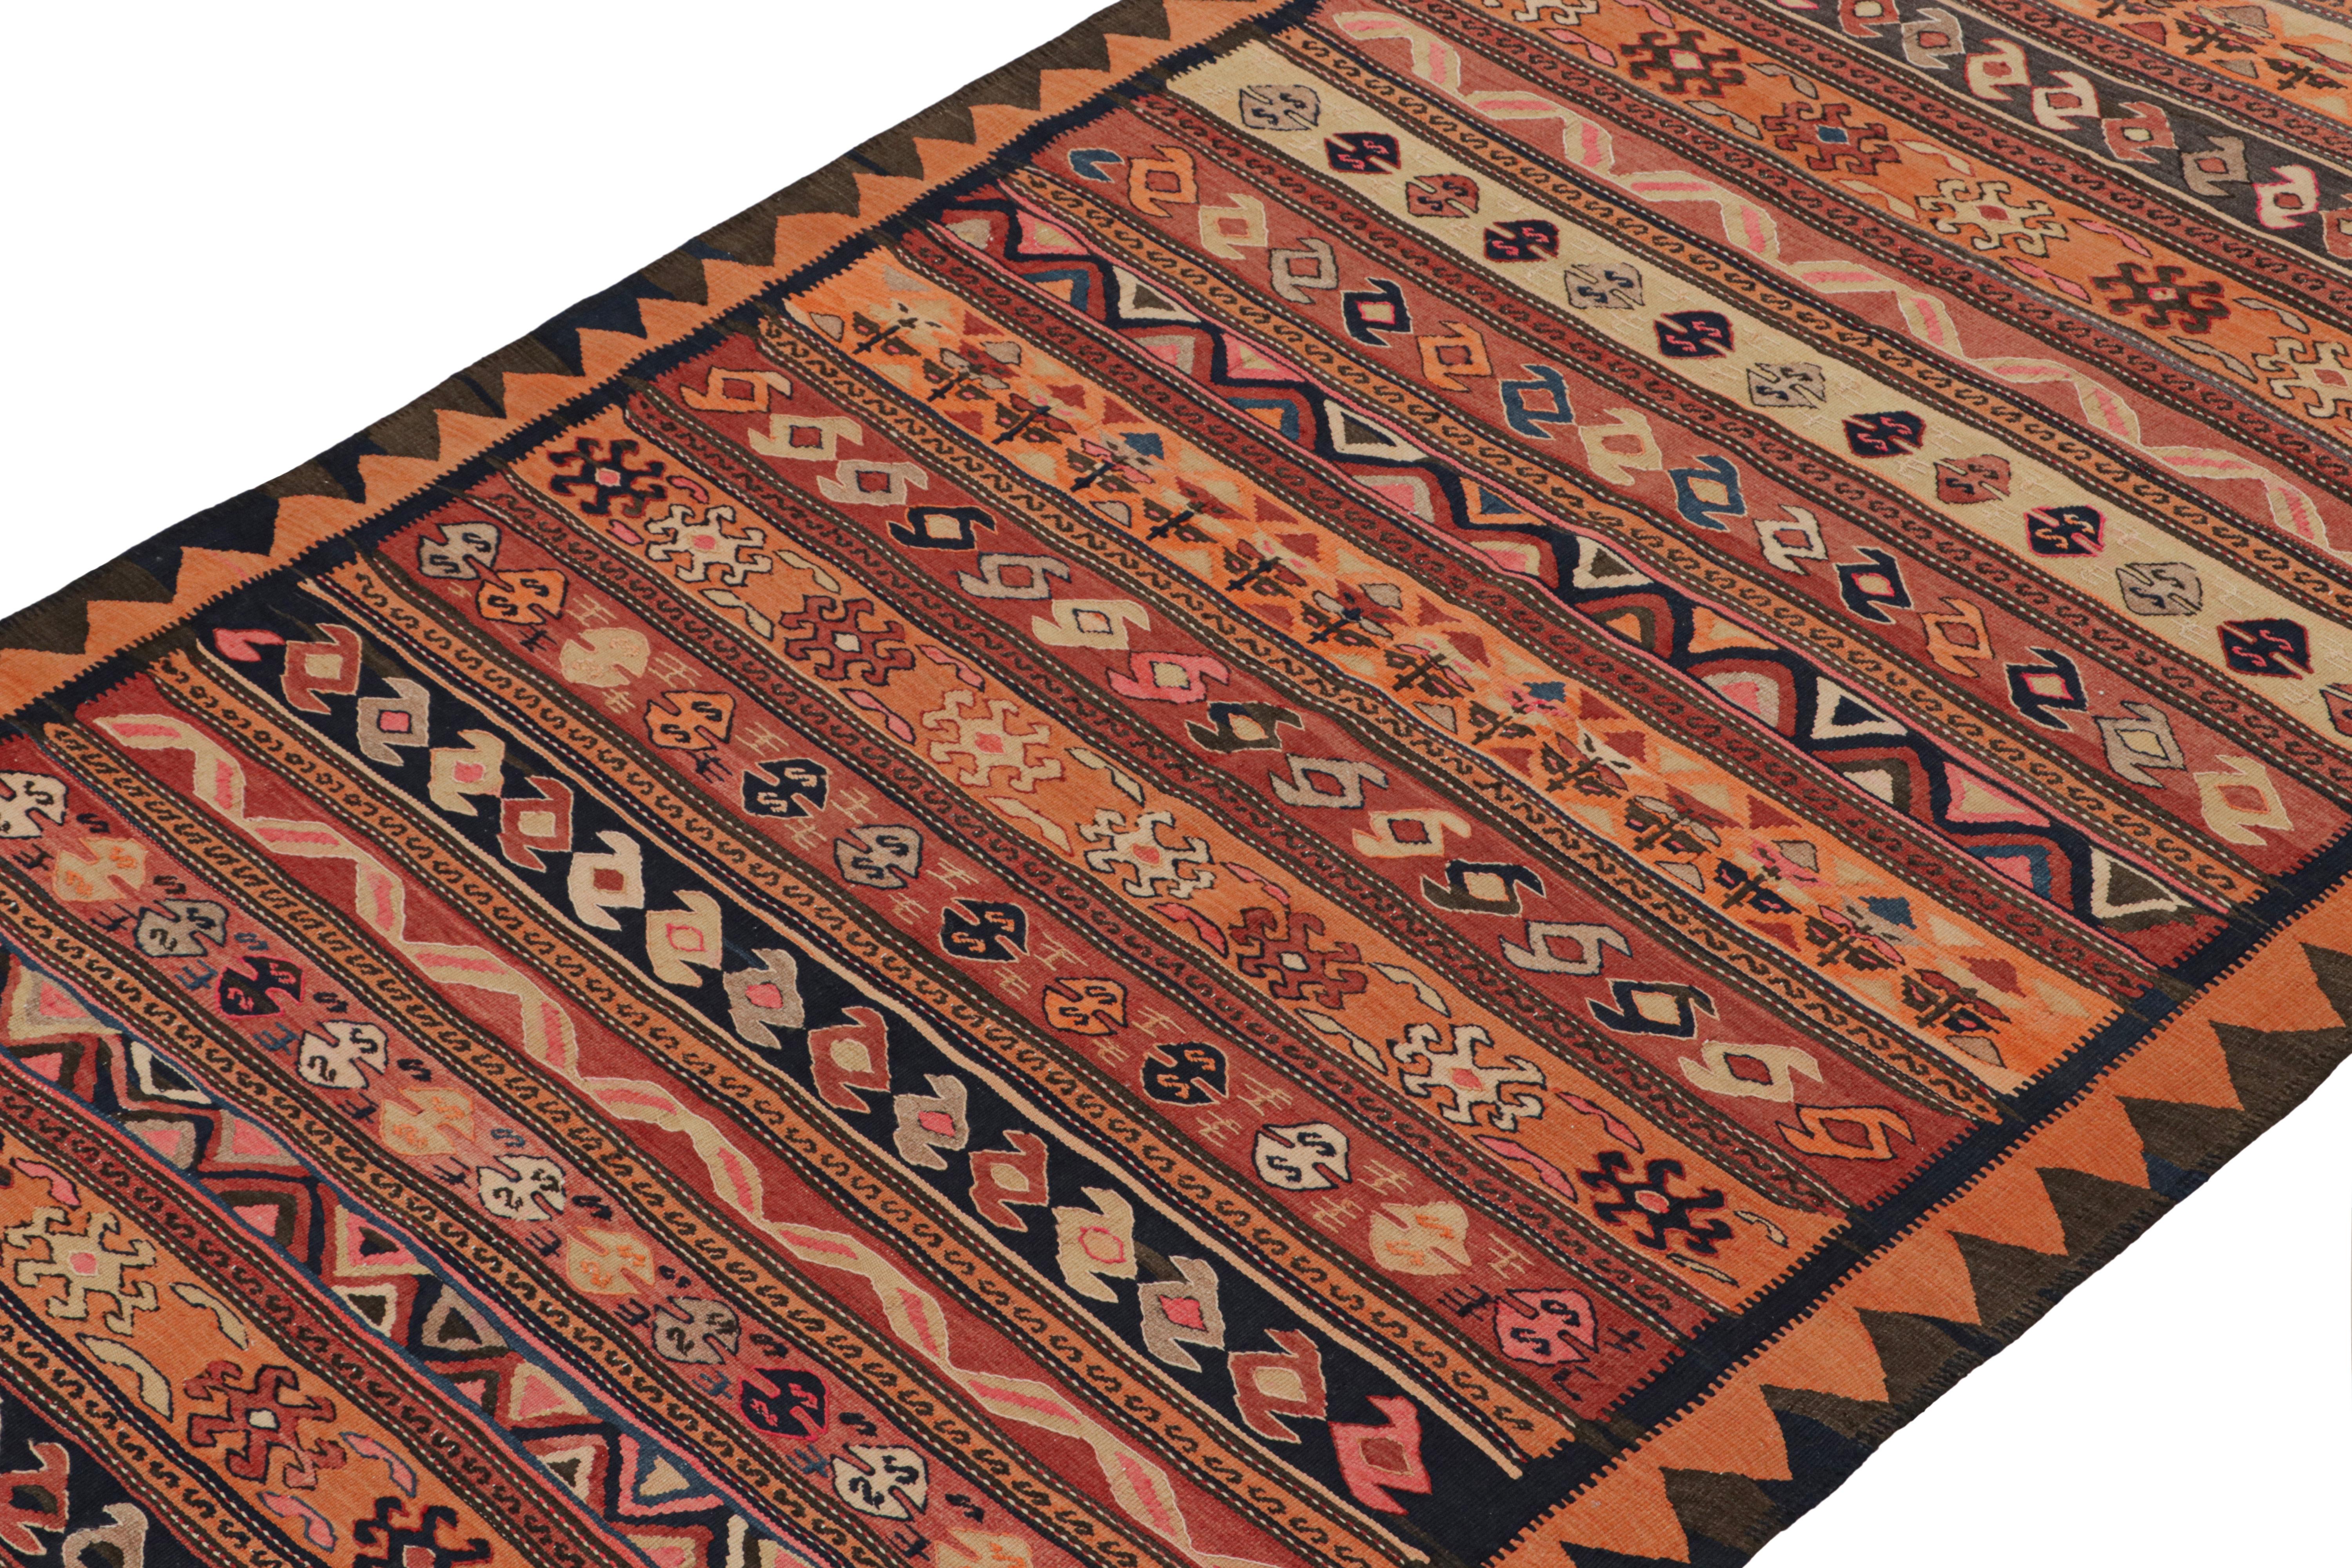 Hand-Knotted Vintage Shahsavan Persian Kilim in Orange with Geometric Patterns by Rug & Kilim For Sale